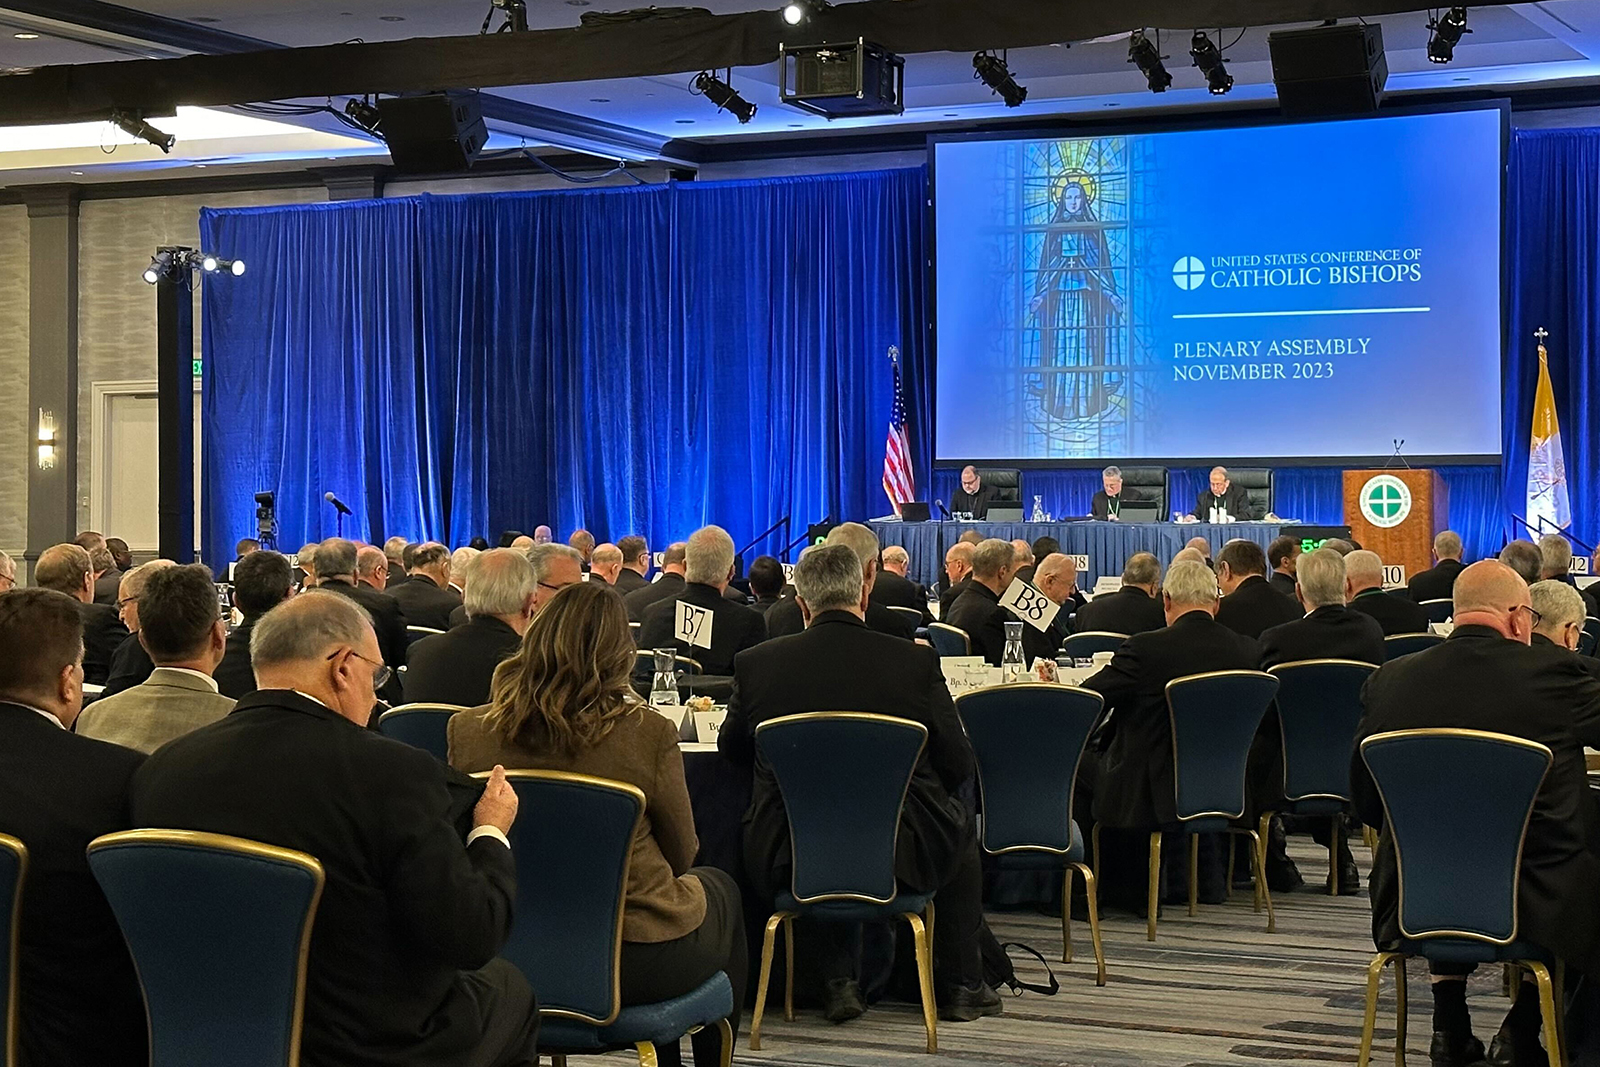 The nation’s Catholic bishops gather for their annual fall meeting at the Marriott Waterfront hotel in Baltimore on Tuesday, Nov. 14, 2023. (AP Photo/Tiffany Stanley)